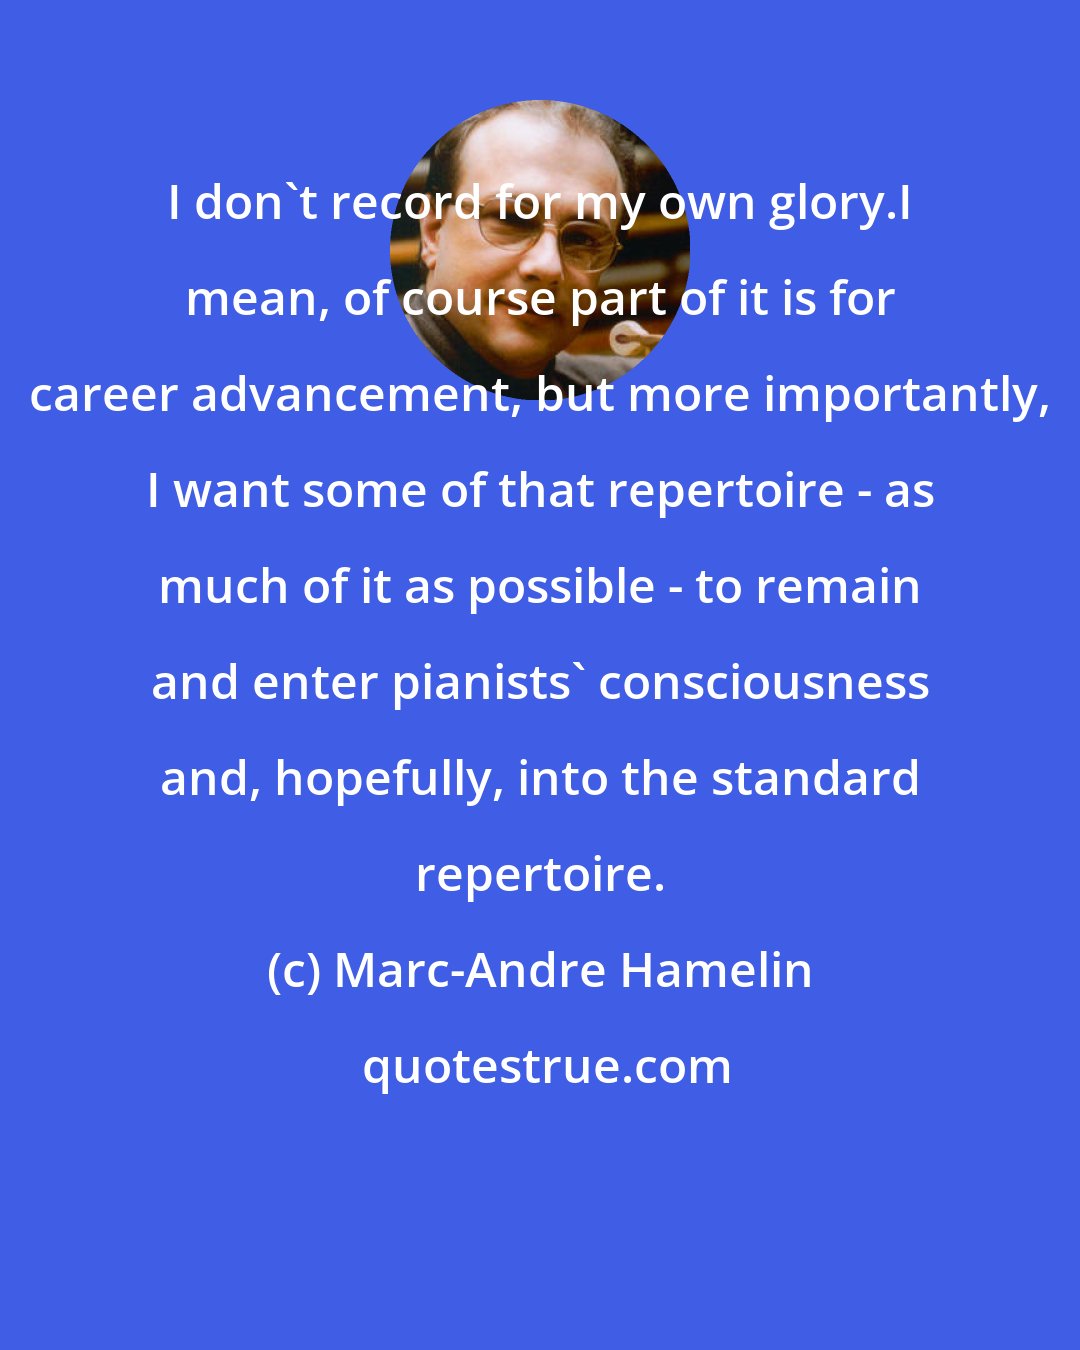 Marc-Andre Hamelin: I don't record for my own glory.I mean, of course part of it is for career advancement, but more importantly, I want some of that repertoire - as much of it as possible - to remain and enter pianists' consciousness and, hopefully, into the standard repertoire.